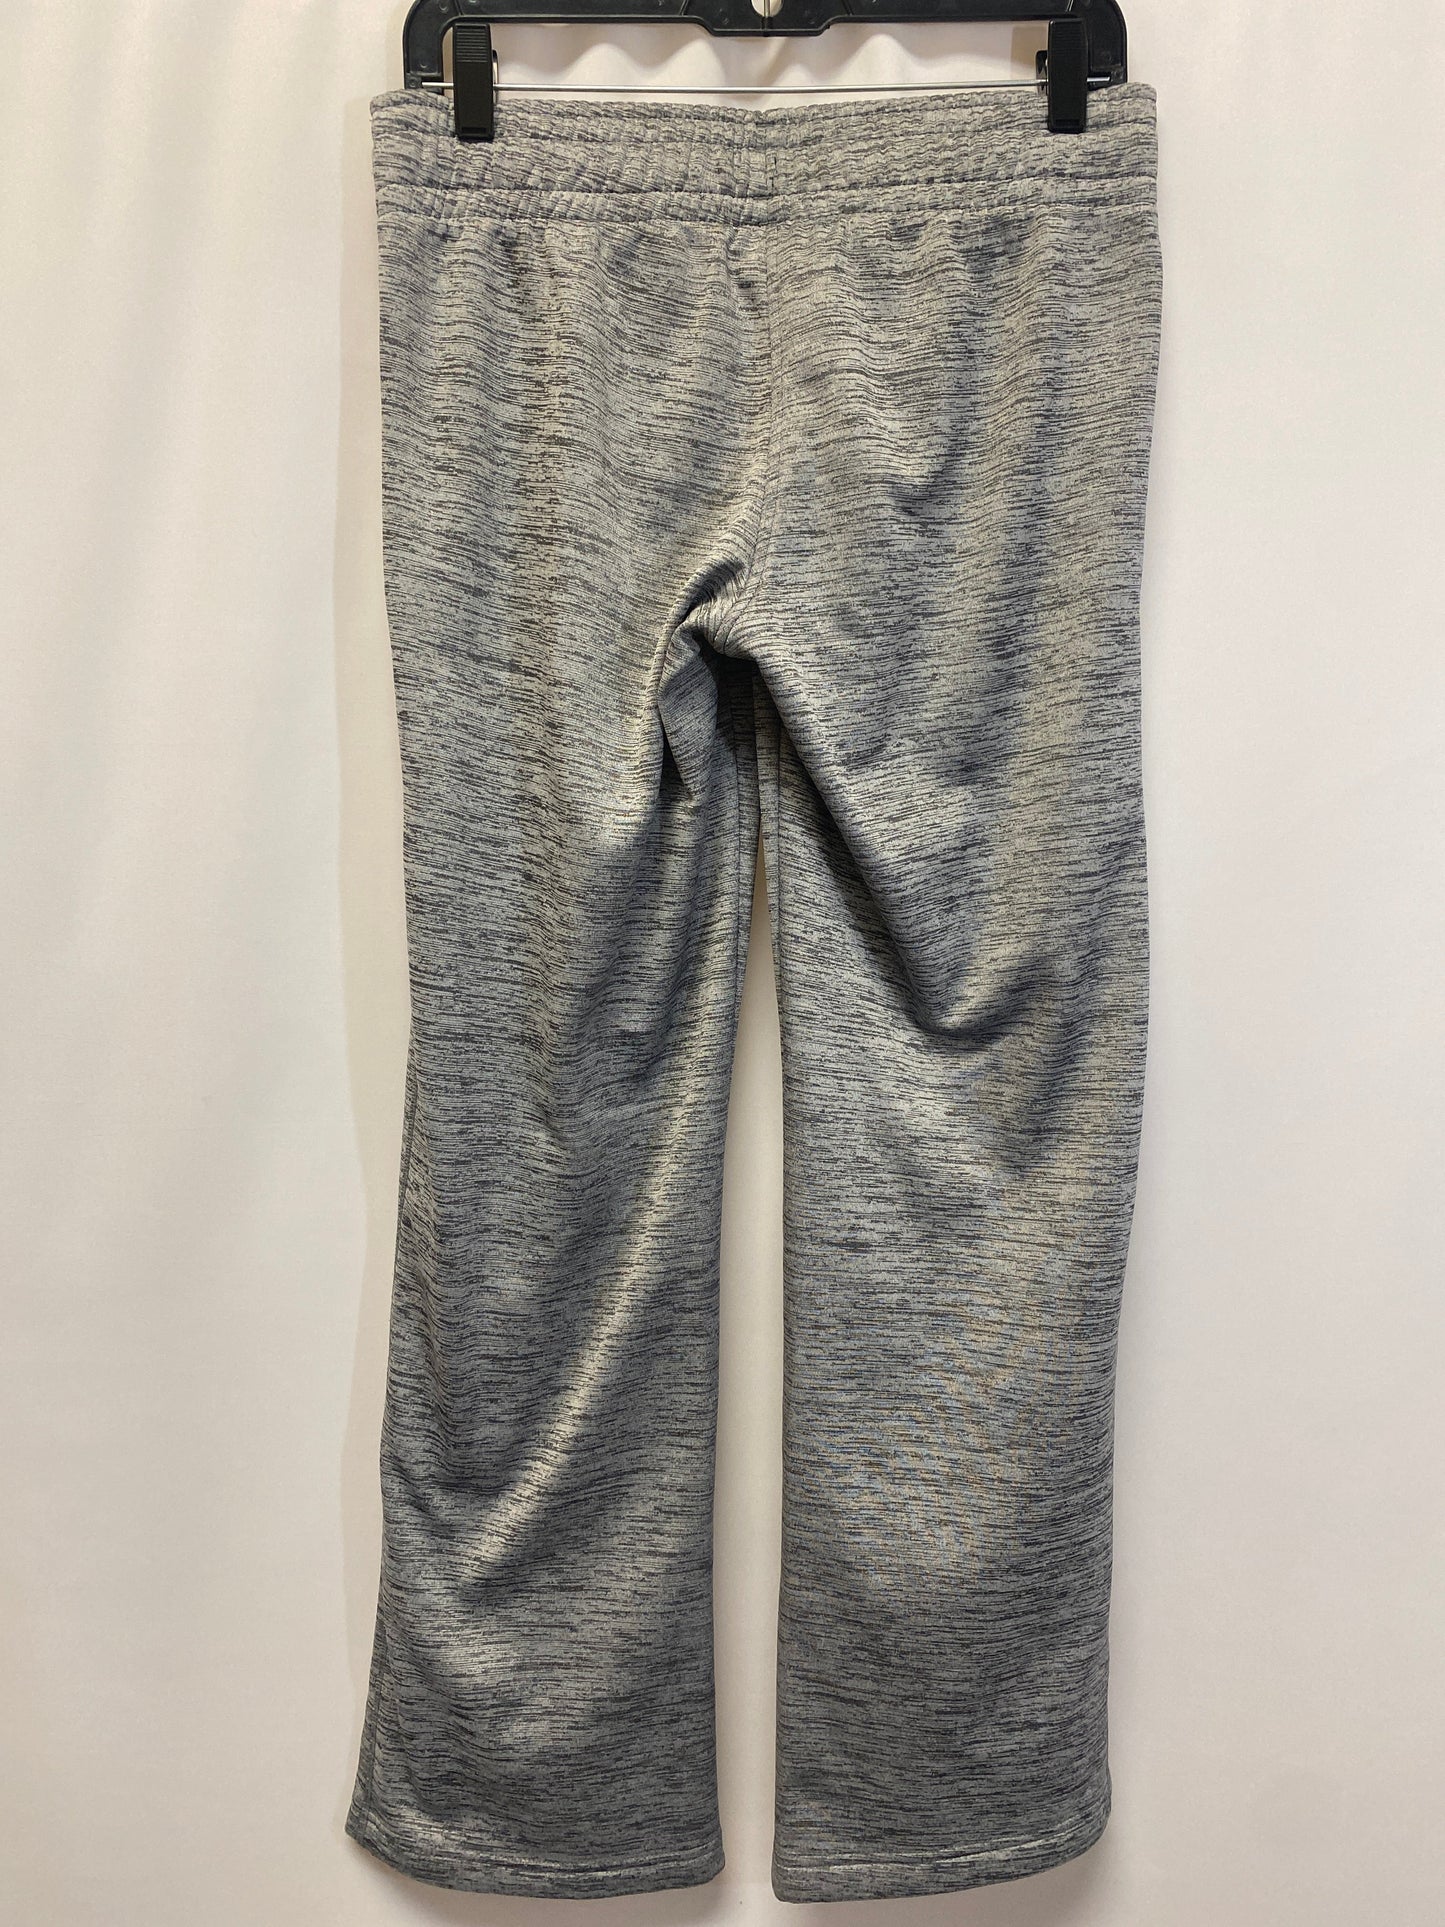 Grey Athletic Pants Under Armour, Size S